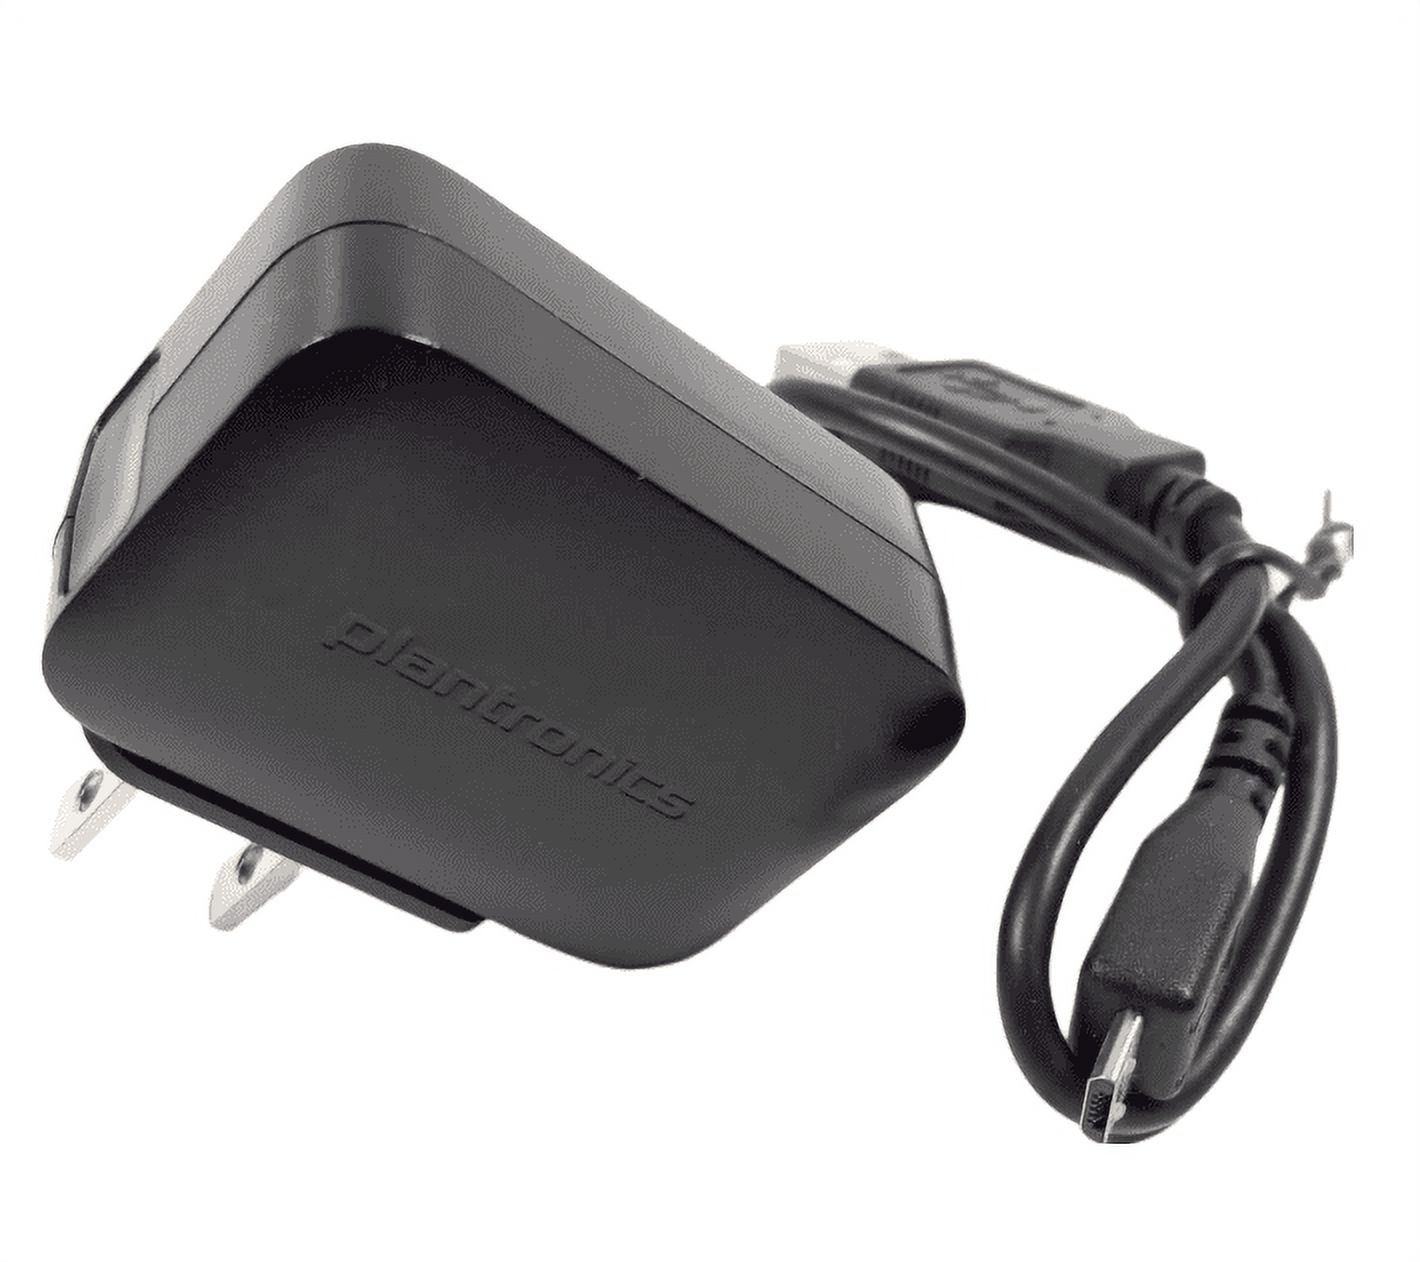 Plantronics SSC-4W5 050075 5.0V 750mA AC Power Adapter Charger 200733-01 - image 2 of 5